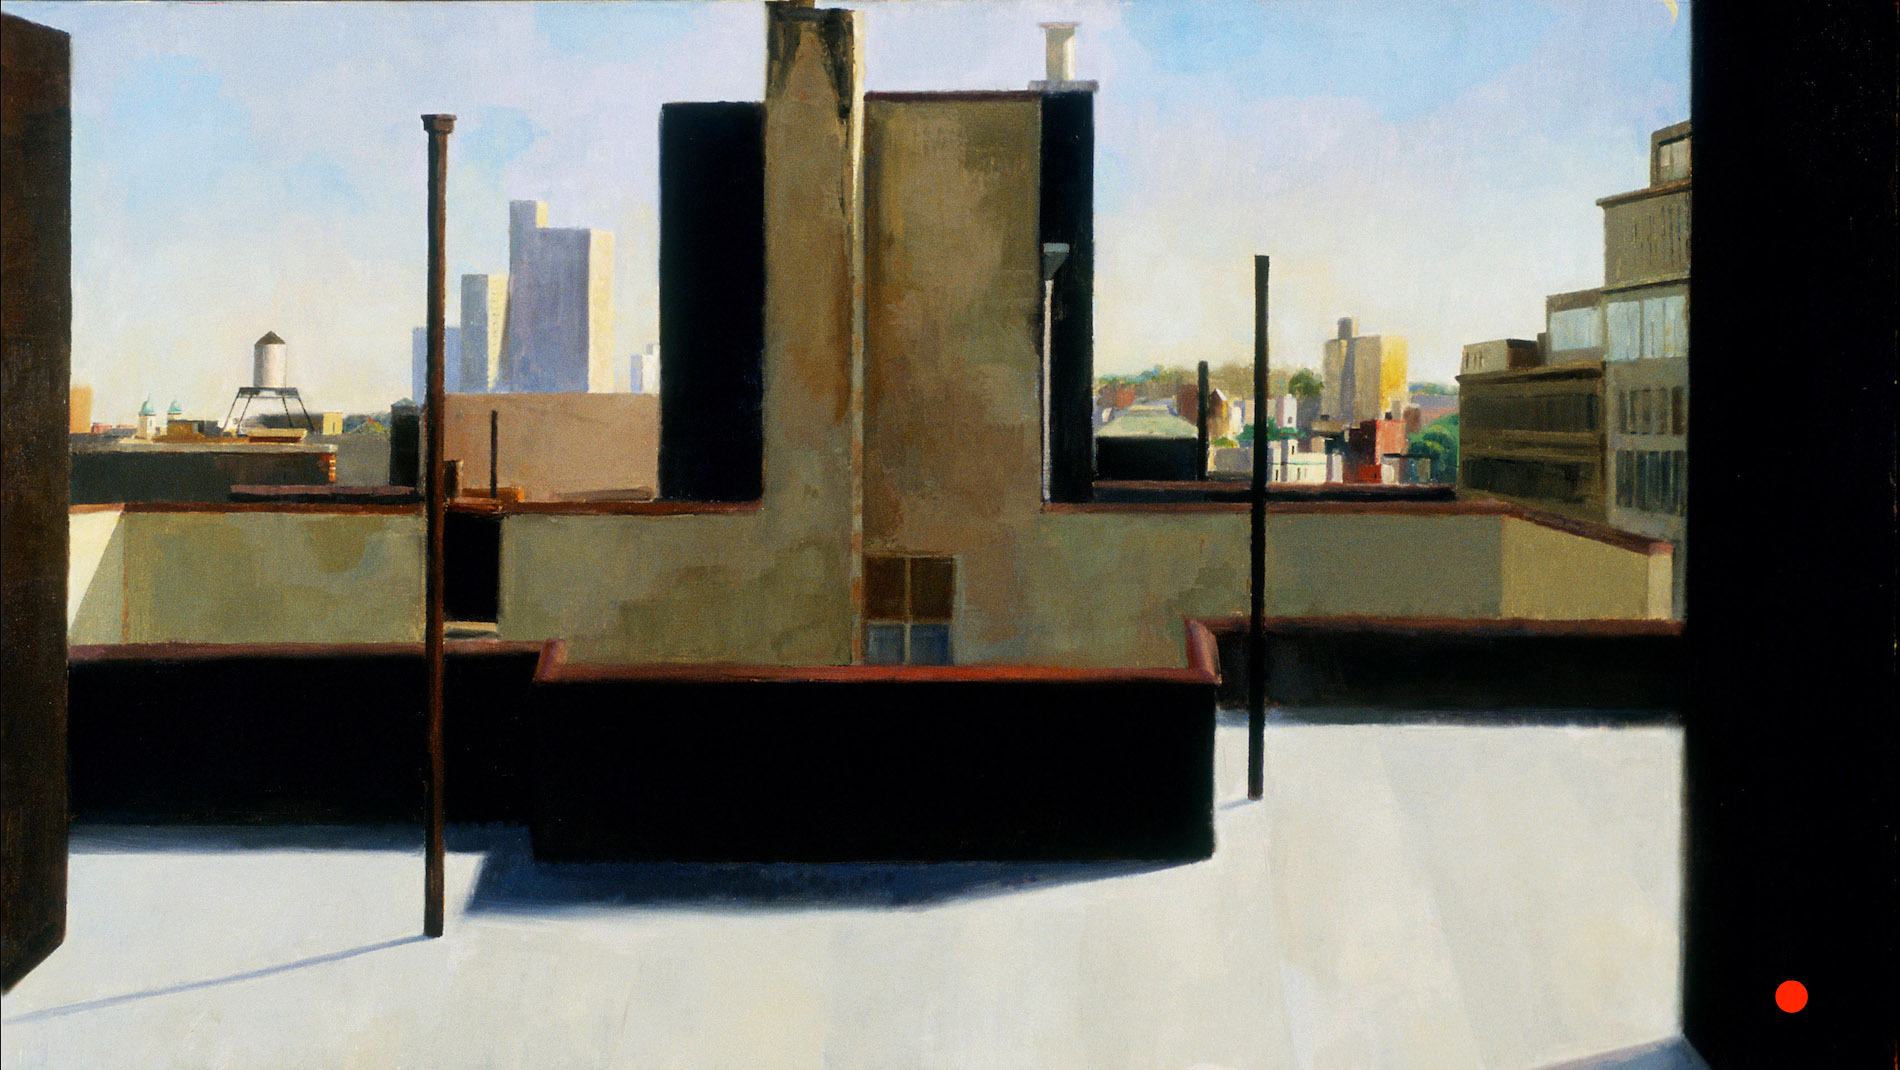 Roof, Clinton Hill, 32 x 60 inches, oil on linen, 1991.